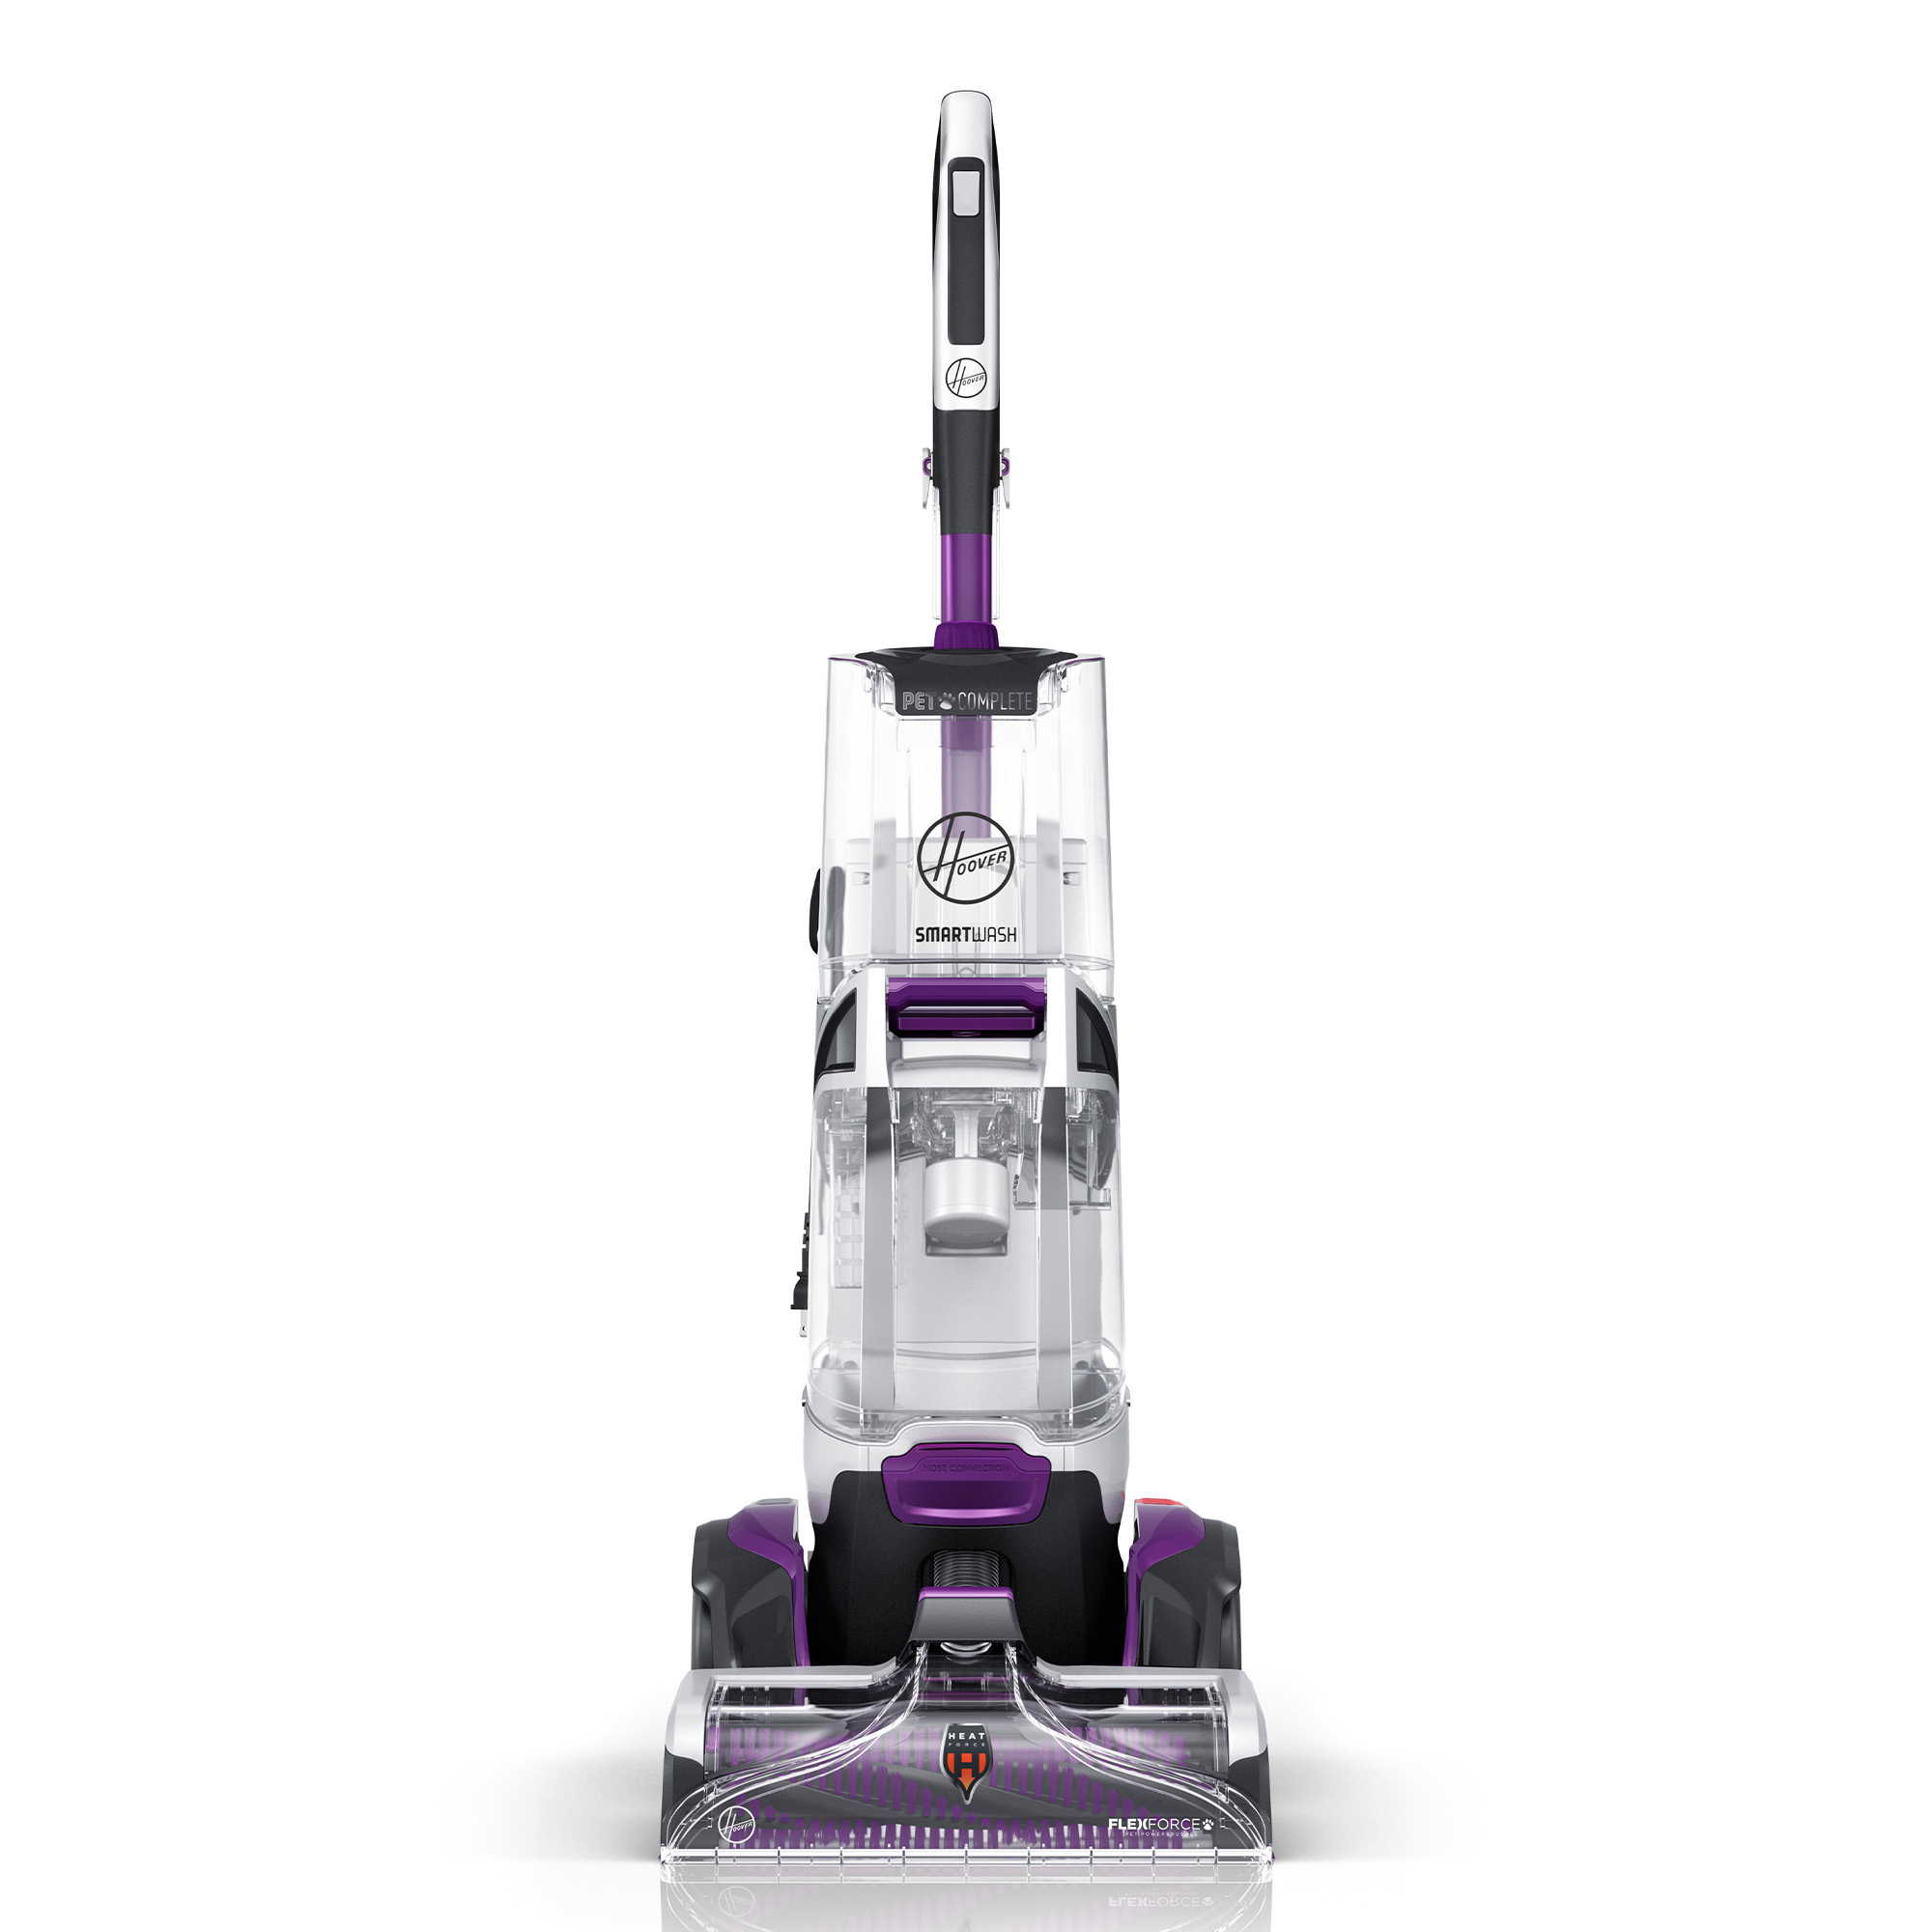 Hoover SmartWash Pet, Complete Automatic Upright Carpet Washer, FH53010 - image 1 of 9